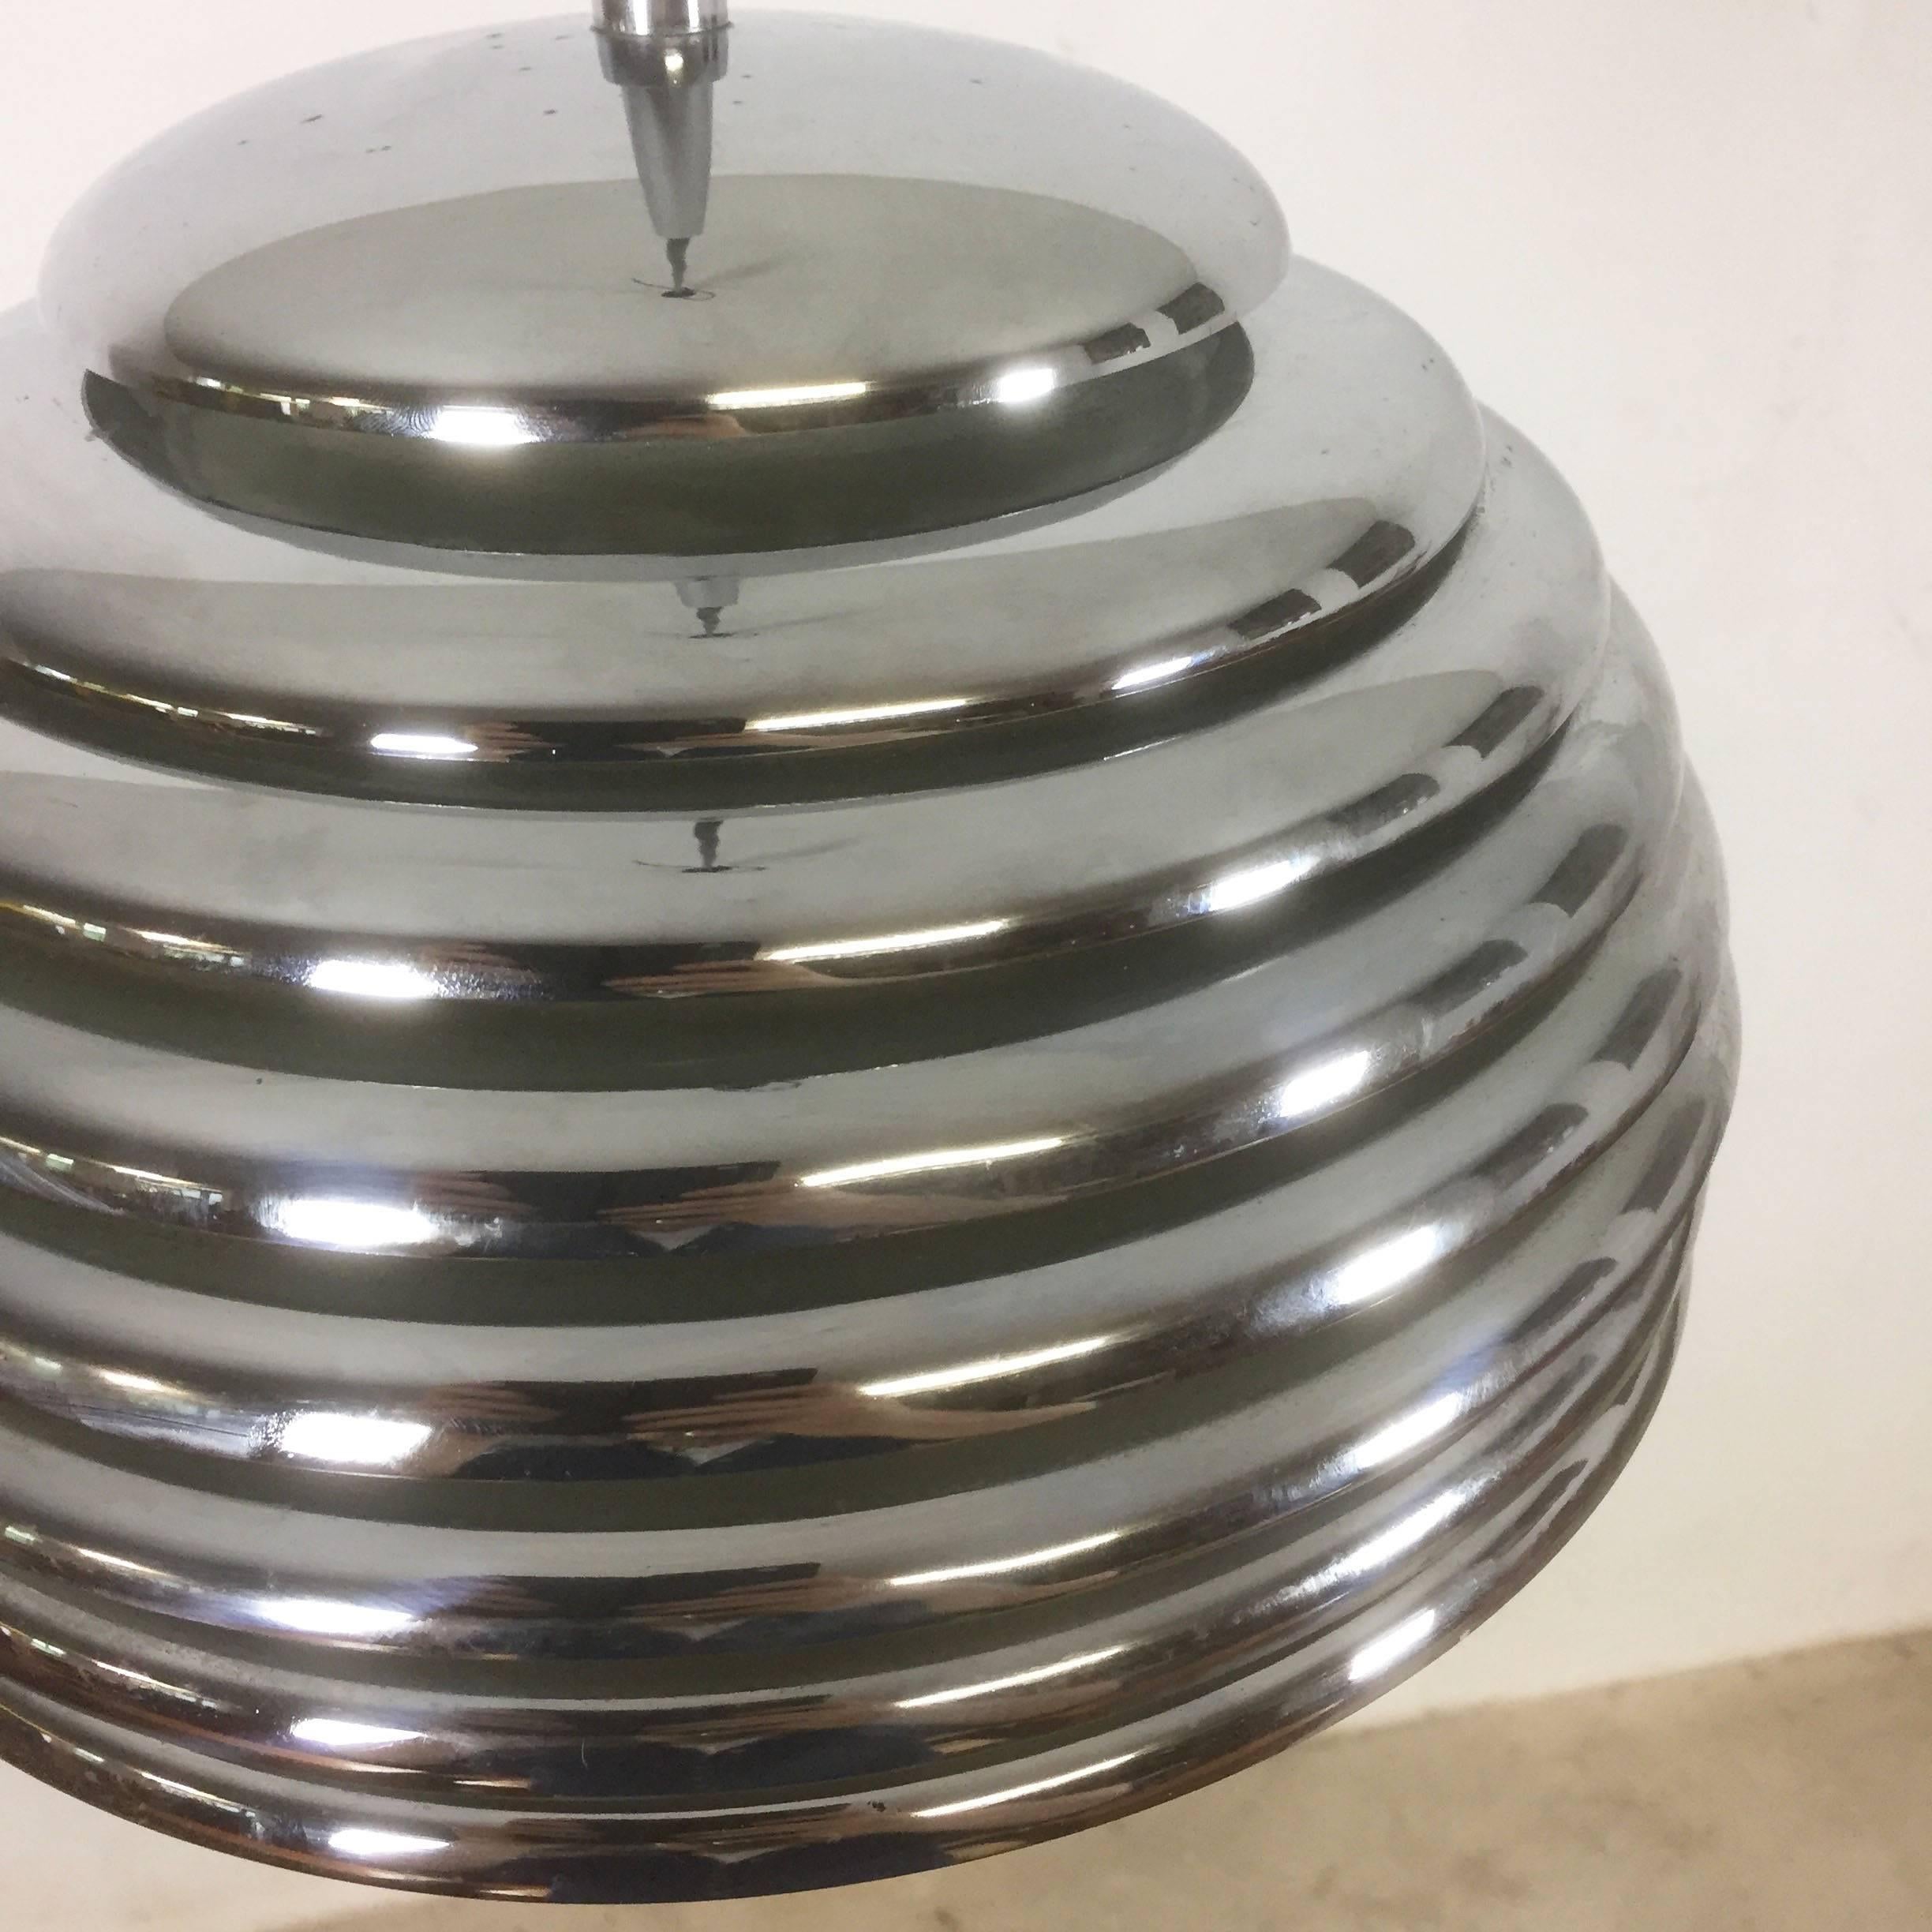 Chrome Hanging Pendant Lamp Light by Kazuo Motozawa for Staff Germany, 1960s For Sale 2